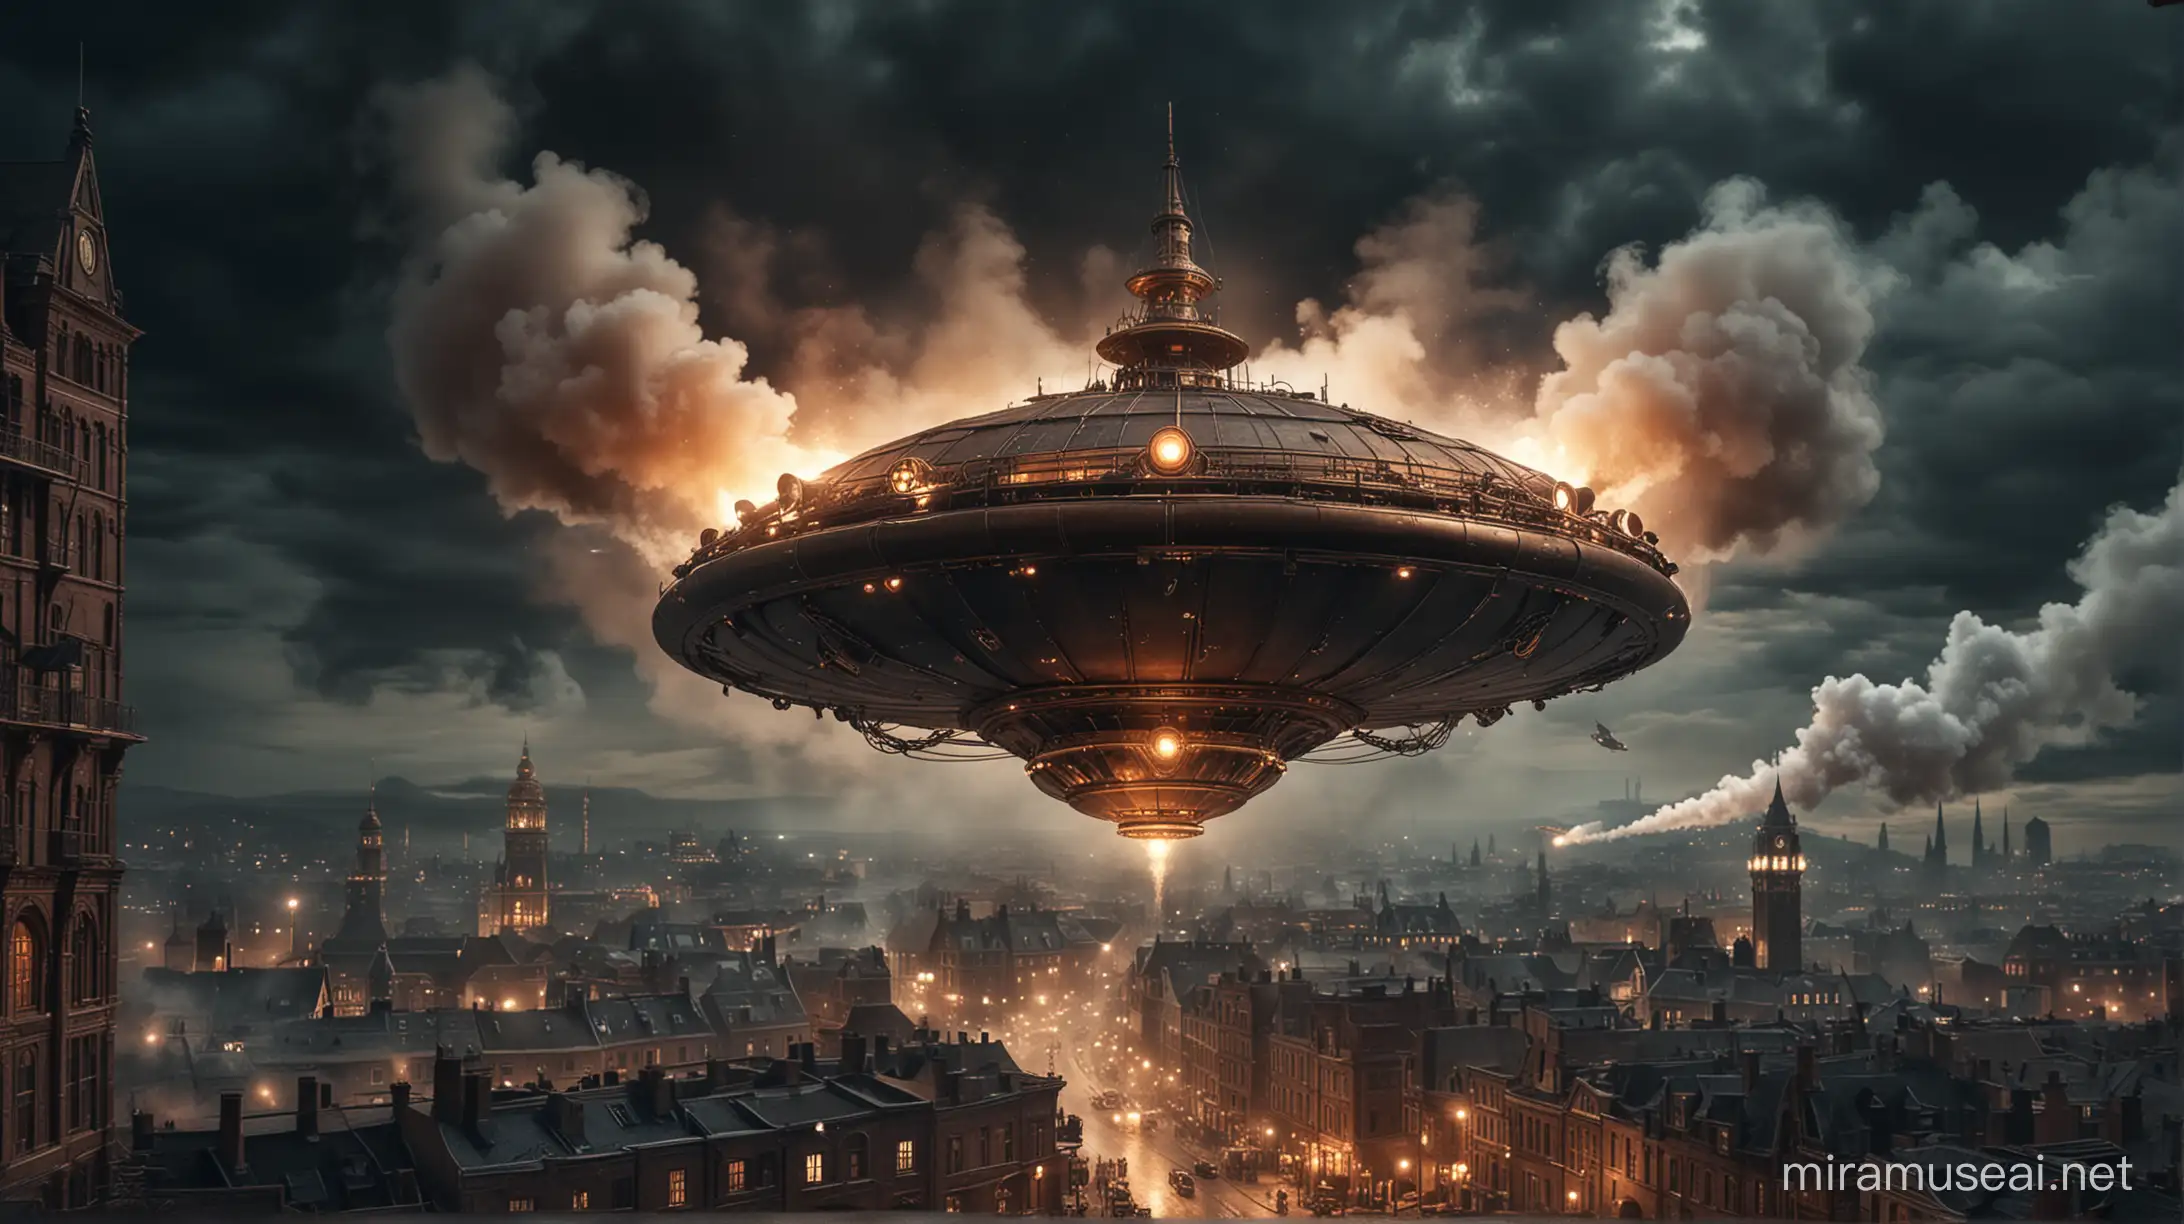 Majestic Steampunk Flying Saucer Hovering Over Illuminated Cityscape